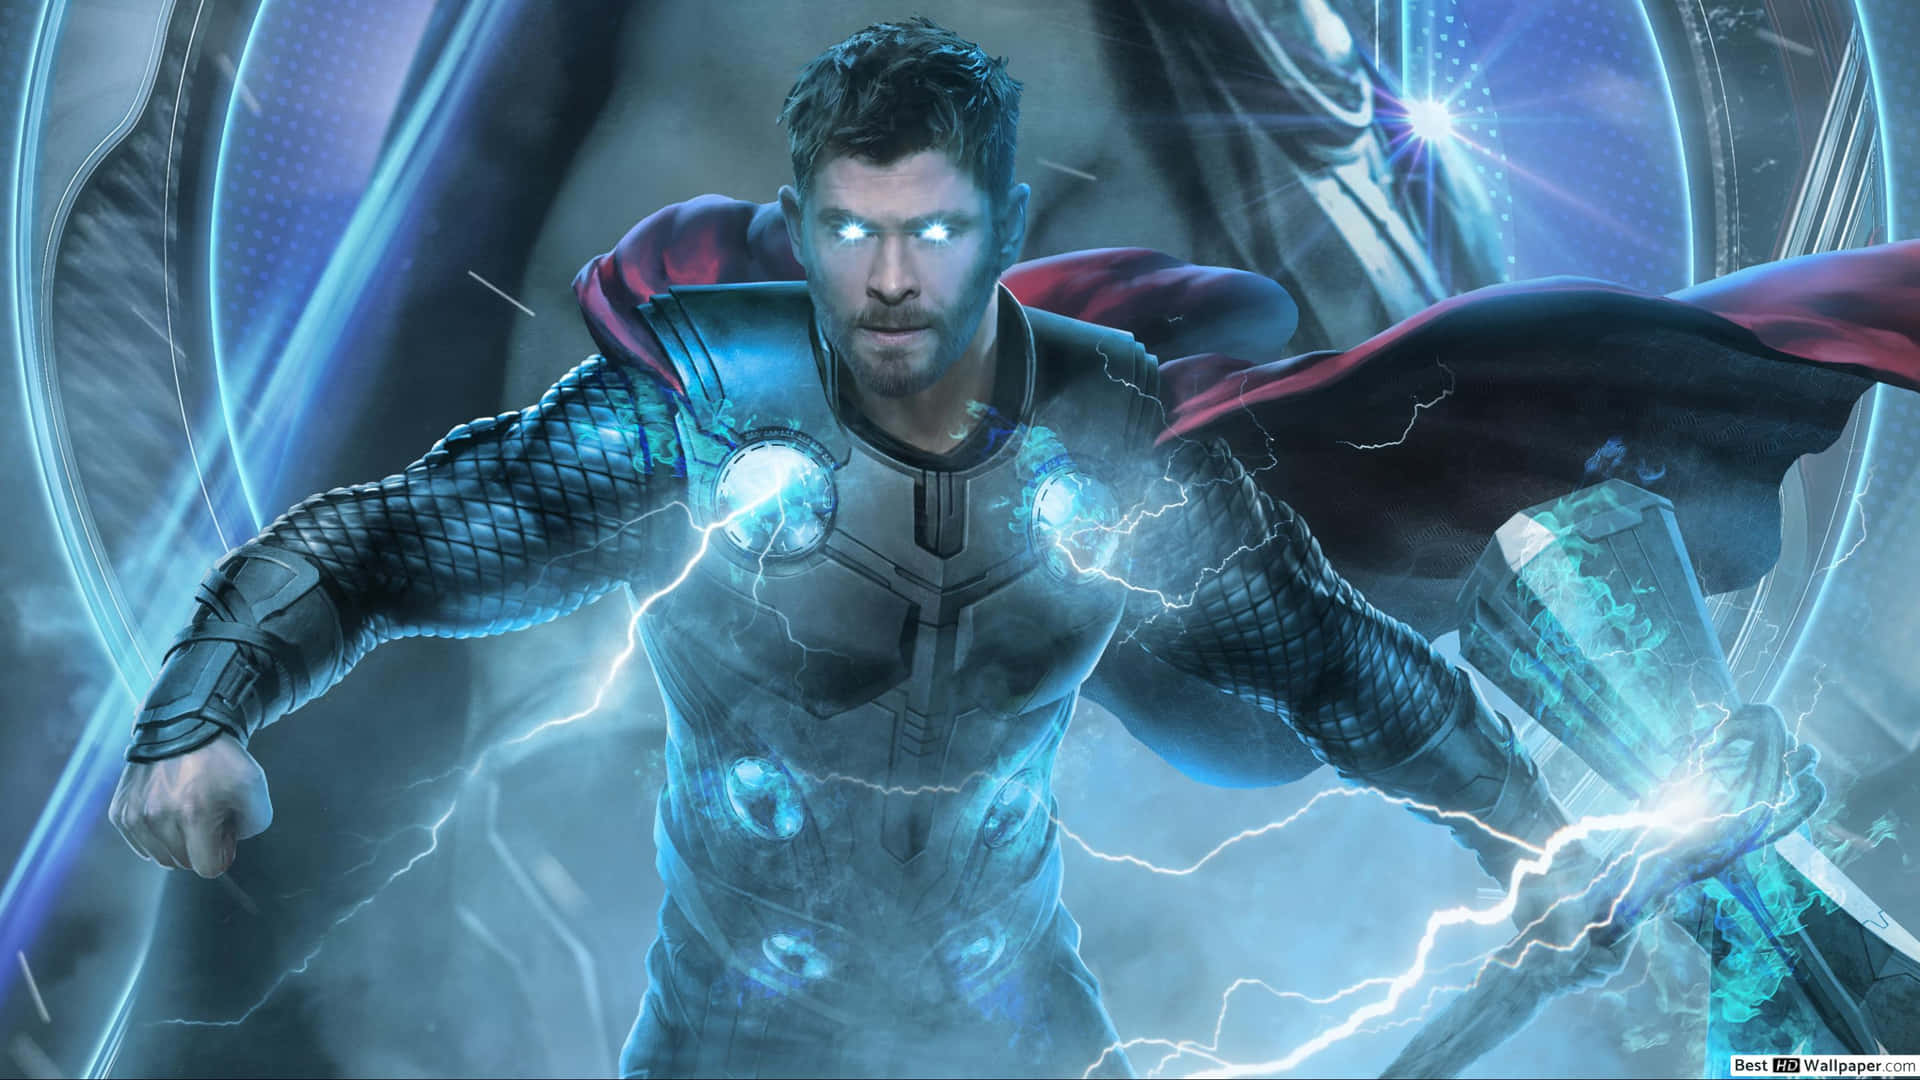 The God of Thunder Unleashed" Wallpaper